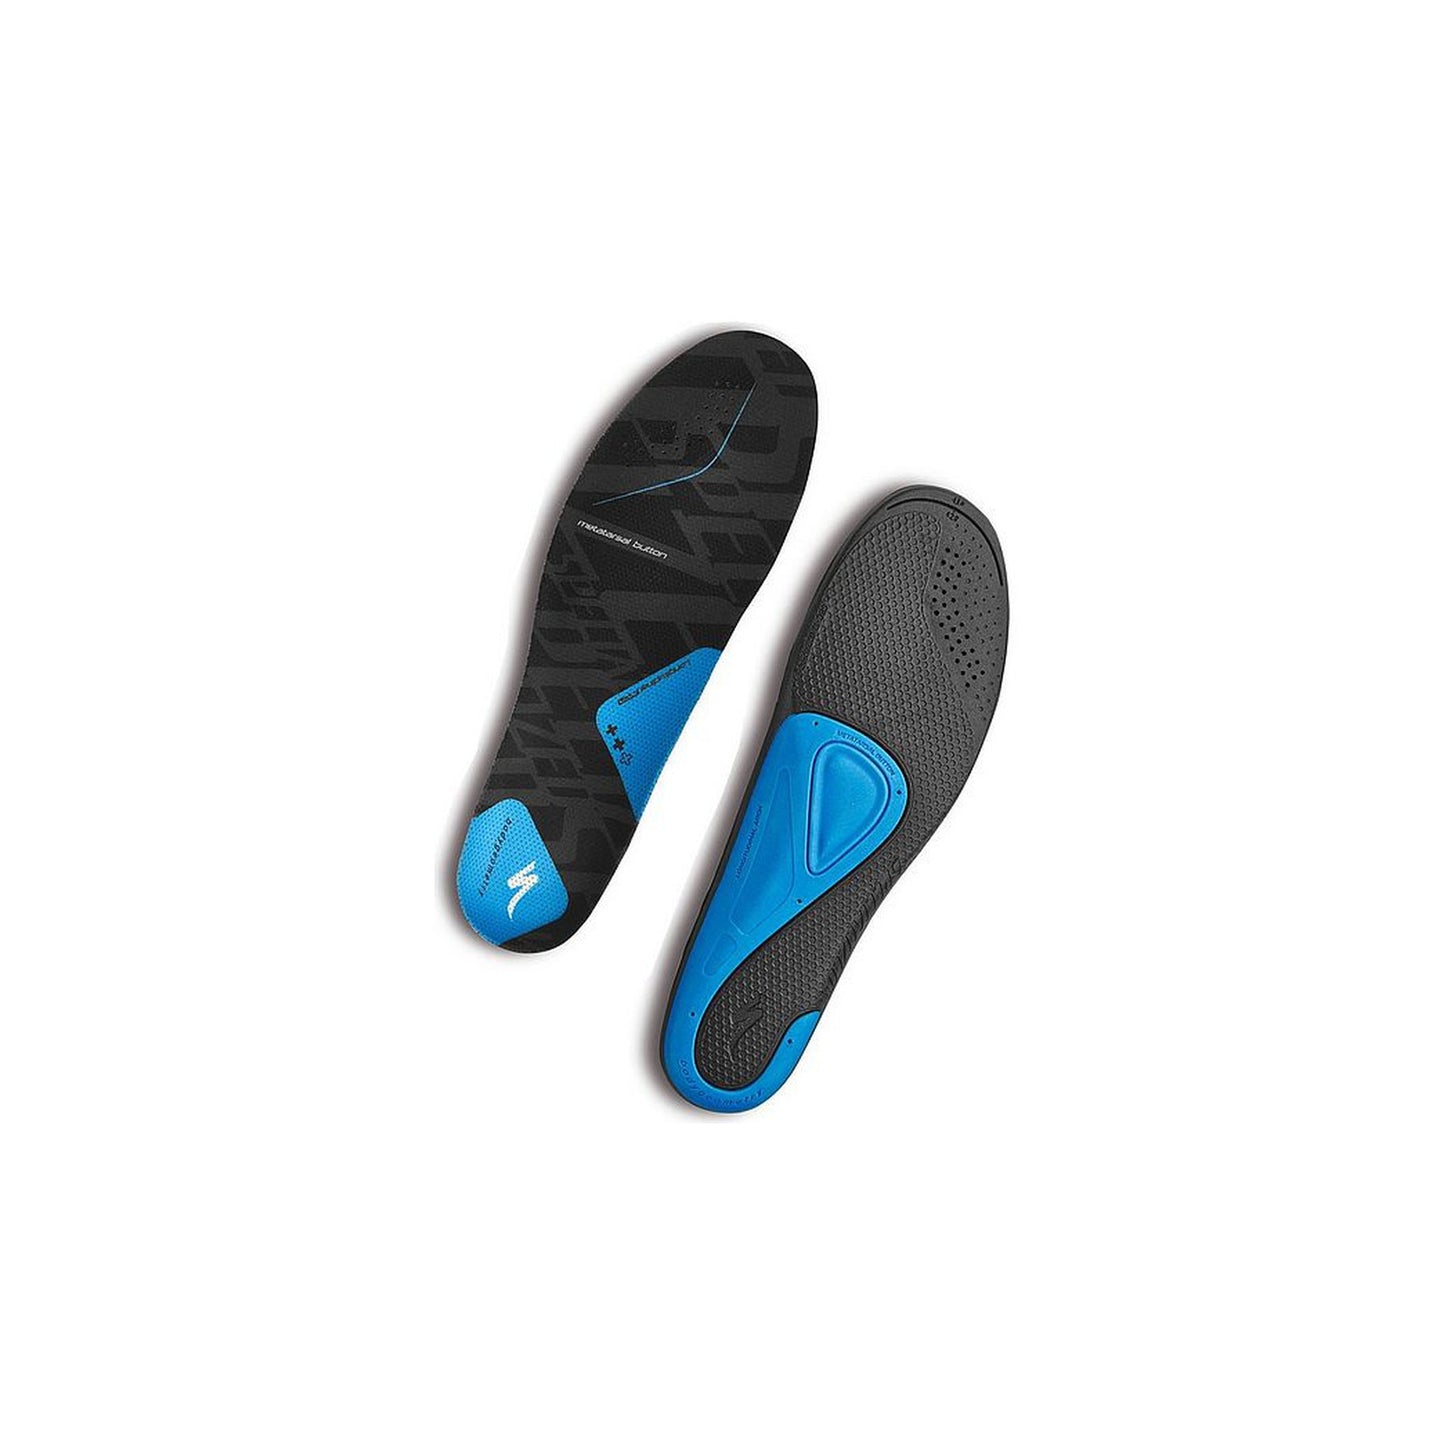 Body Geometry SL Footbeds | completecyclist - Body Geometry Footbeds are ergonomically designed and scientifically tested to increase power, endurance, and comfort by optimizing hip, knee, and foot